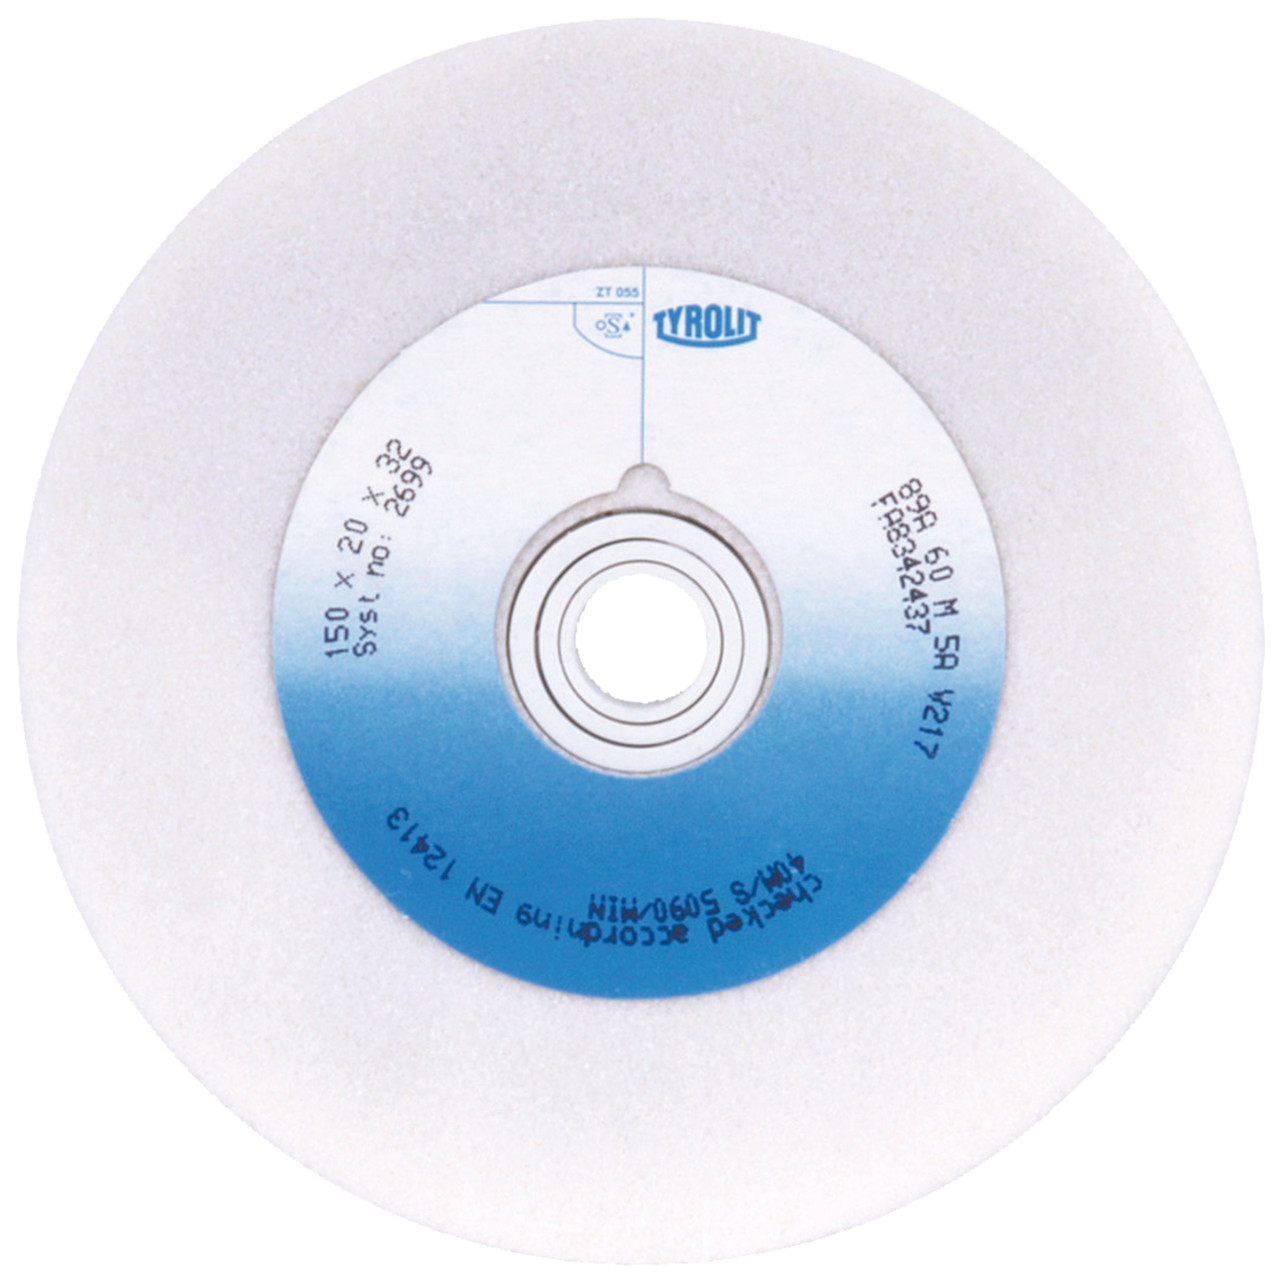 Tyrolit Conventional ceramic grinding discs DxDxH 150x25x32 For high-alloy steels and HSS, shape: 1, Art. 2762